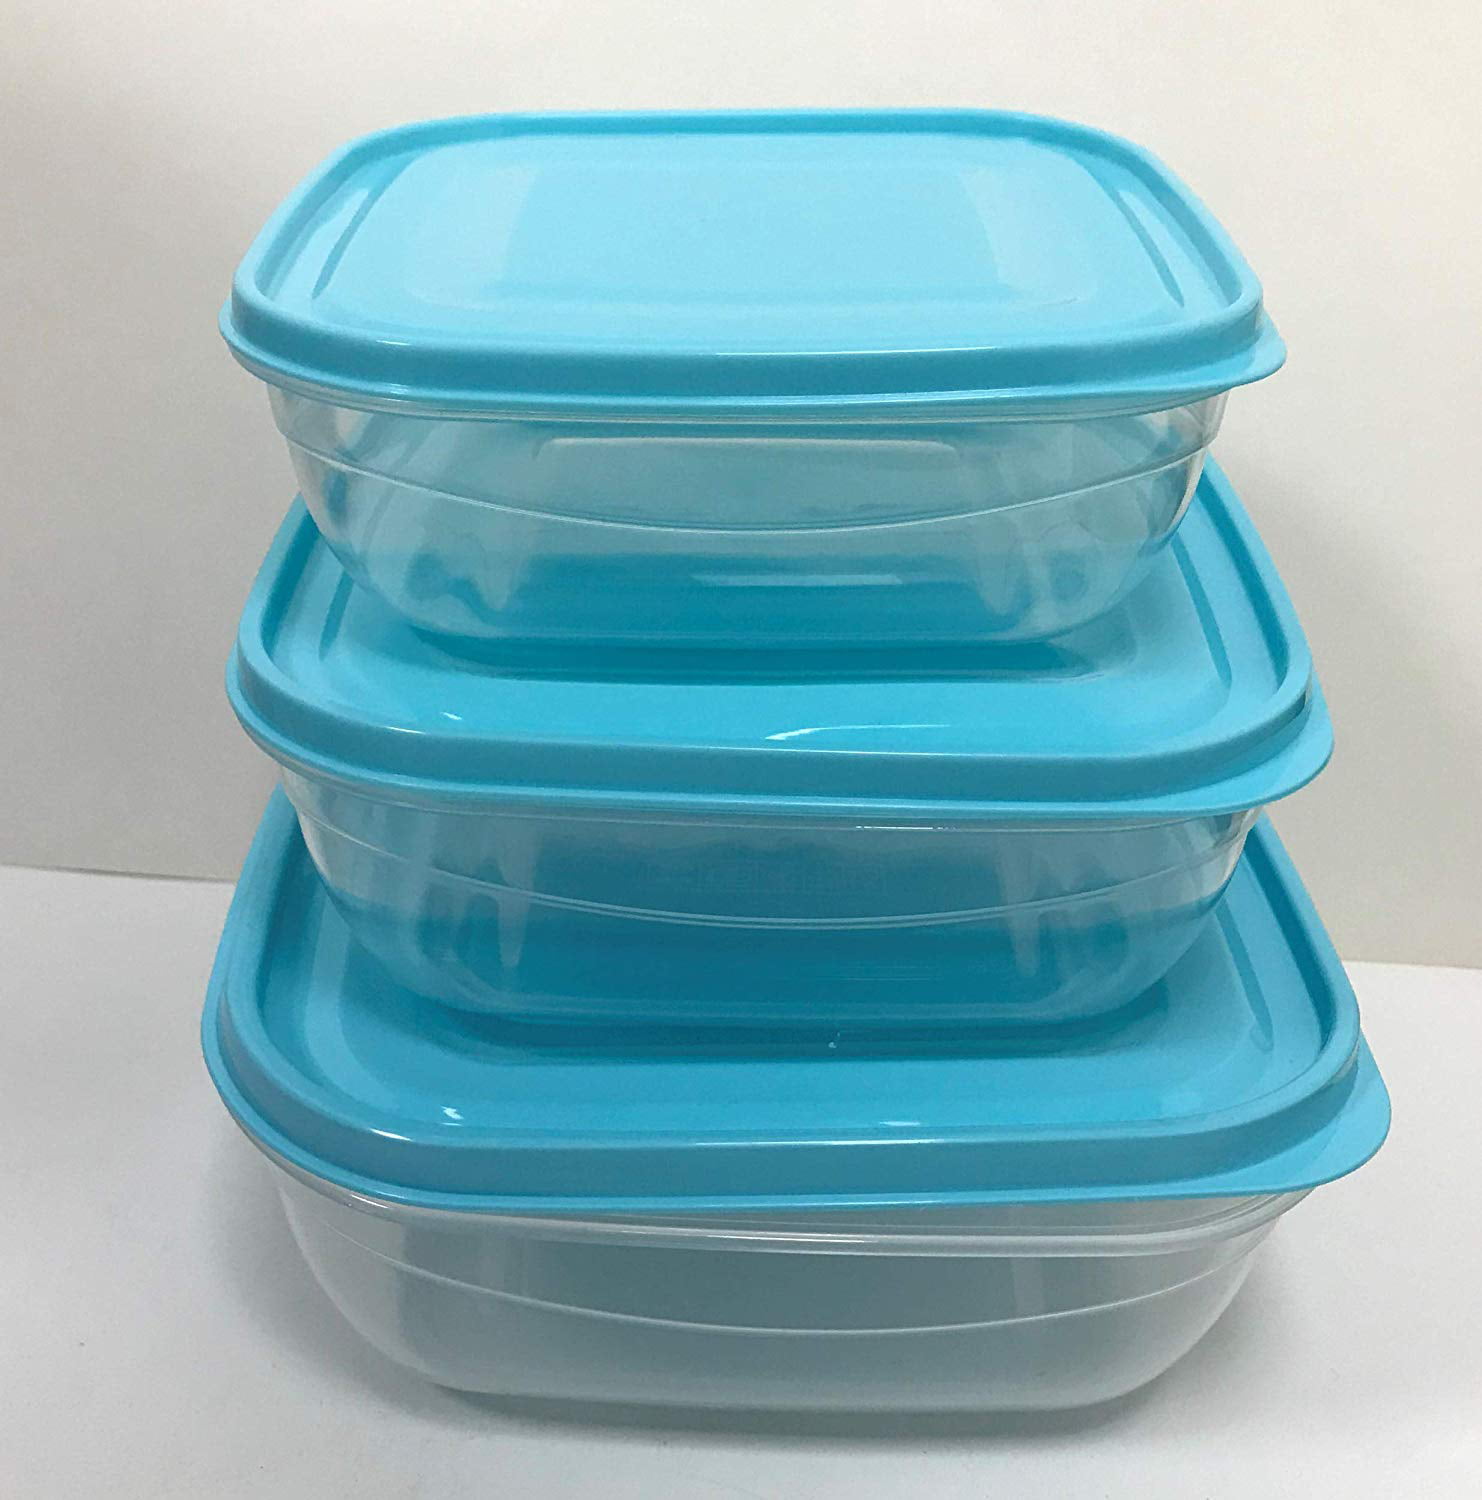 All For You Plastic Food Storage Container Set with lids